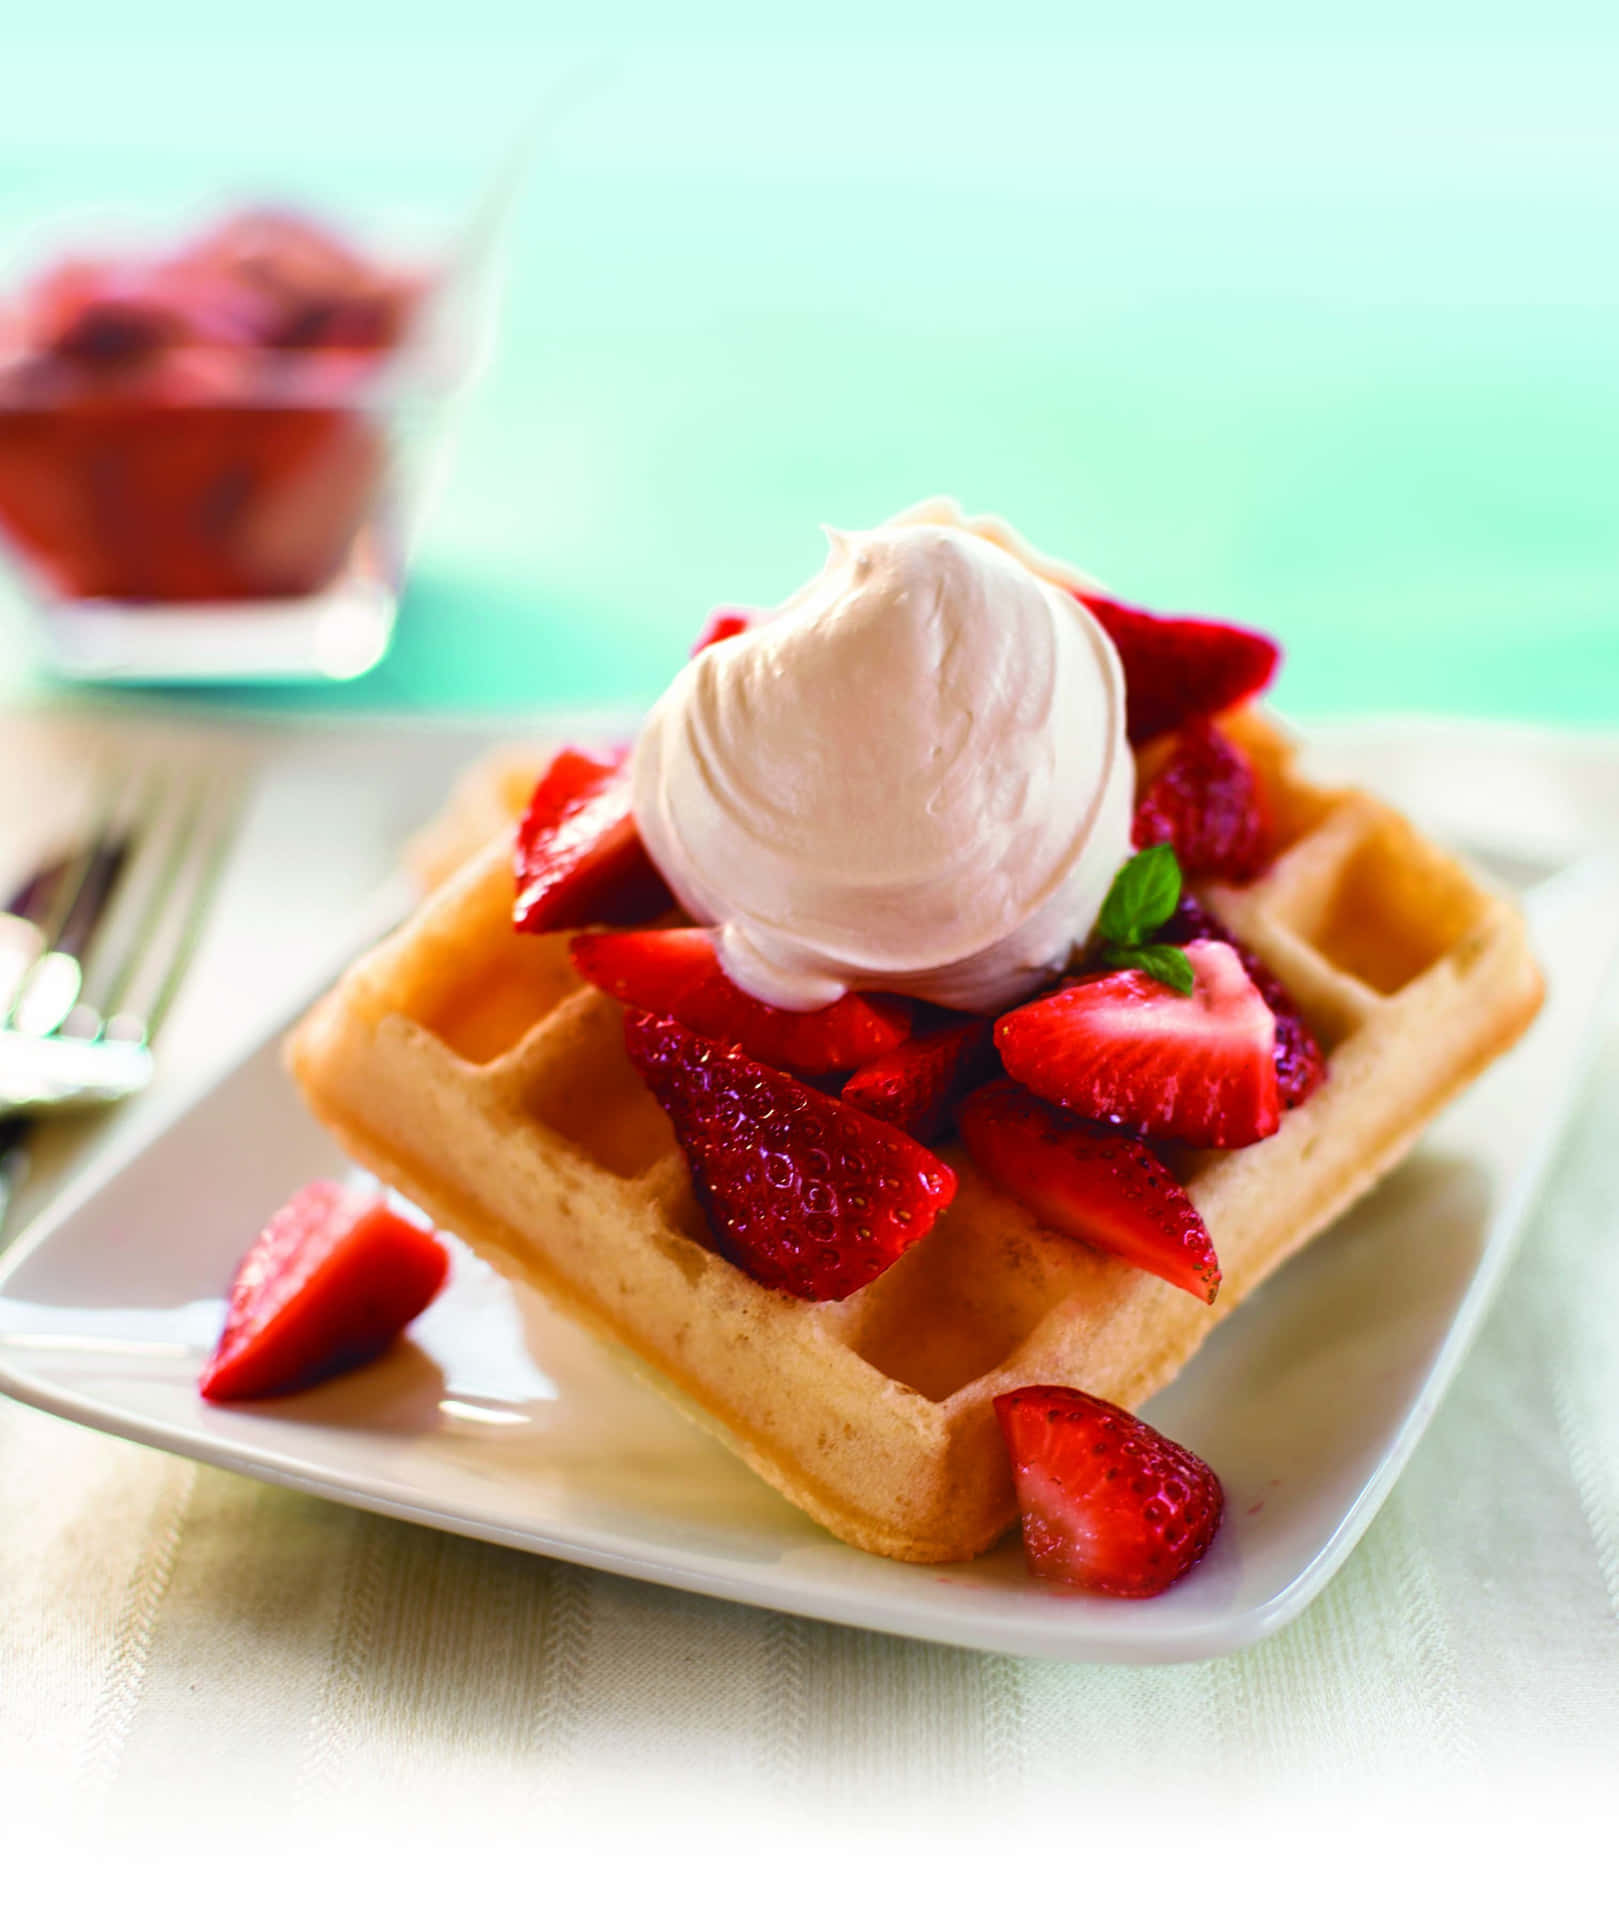 Waffle of Your Dreams